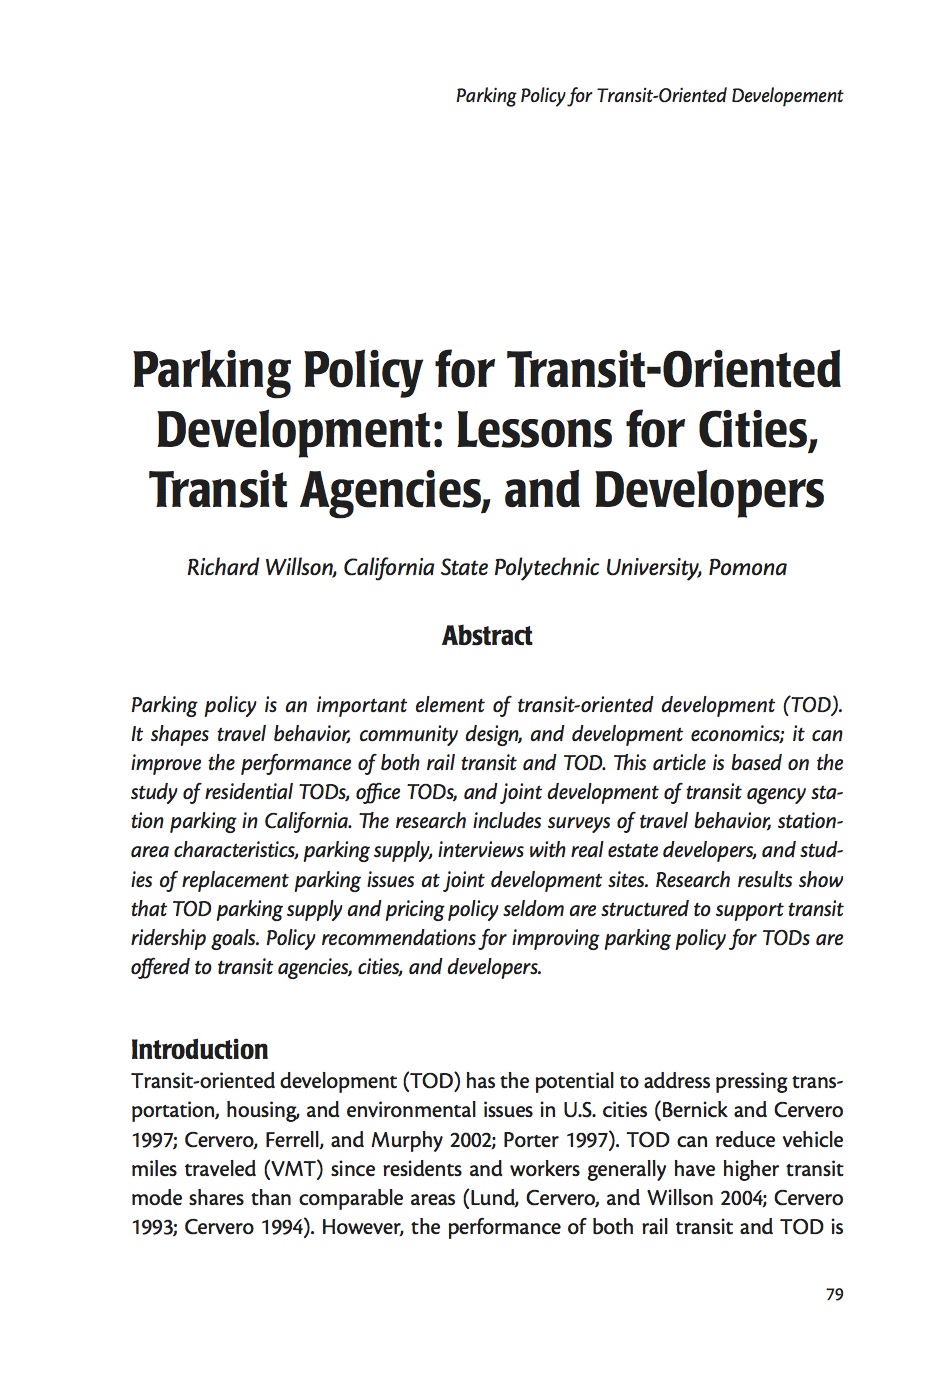 Parking Policy for Transit-Oriented Development: Lessons for Cities,Transit Agencies, and Developers